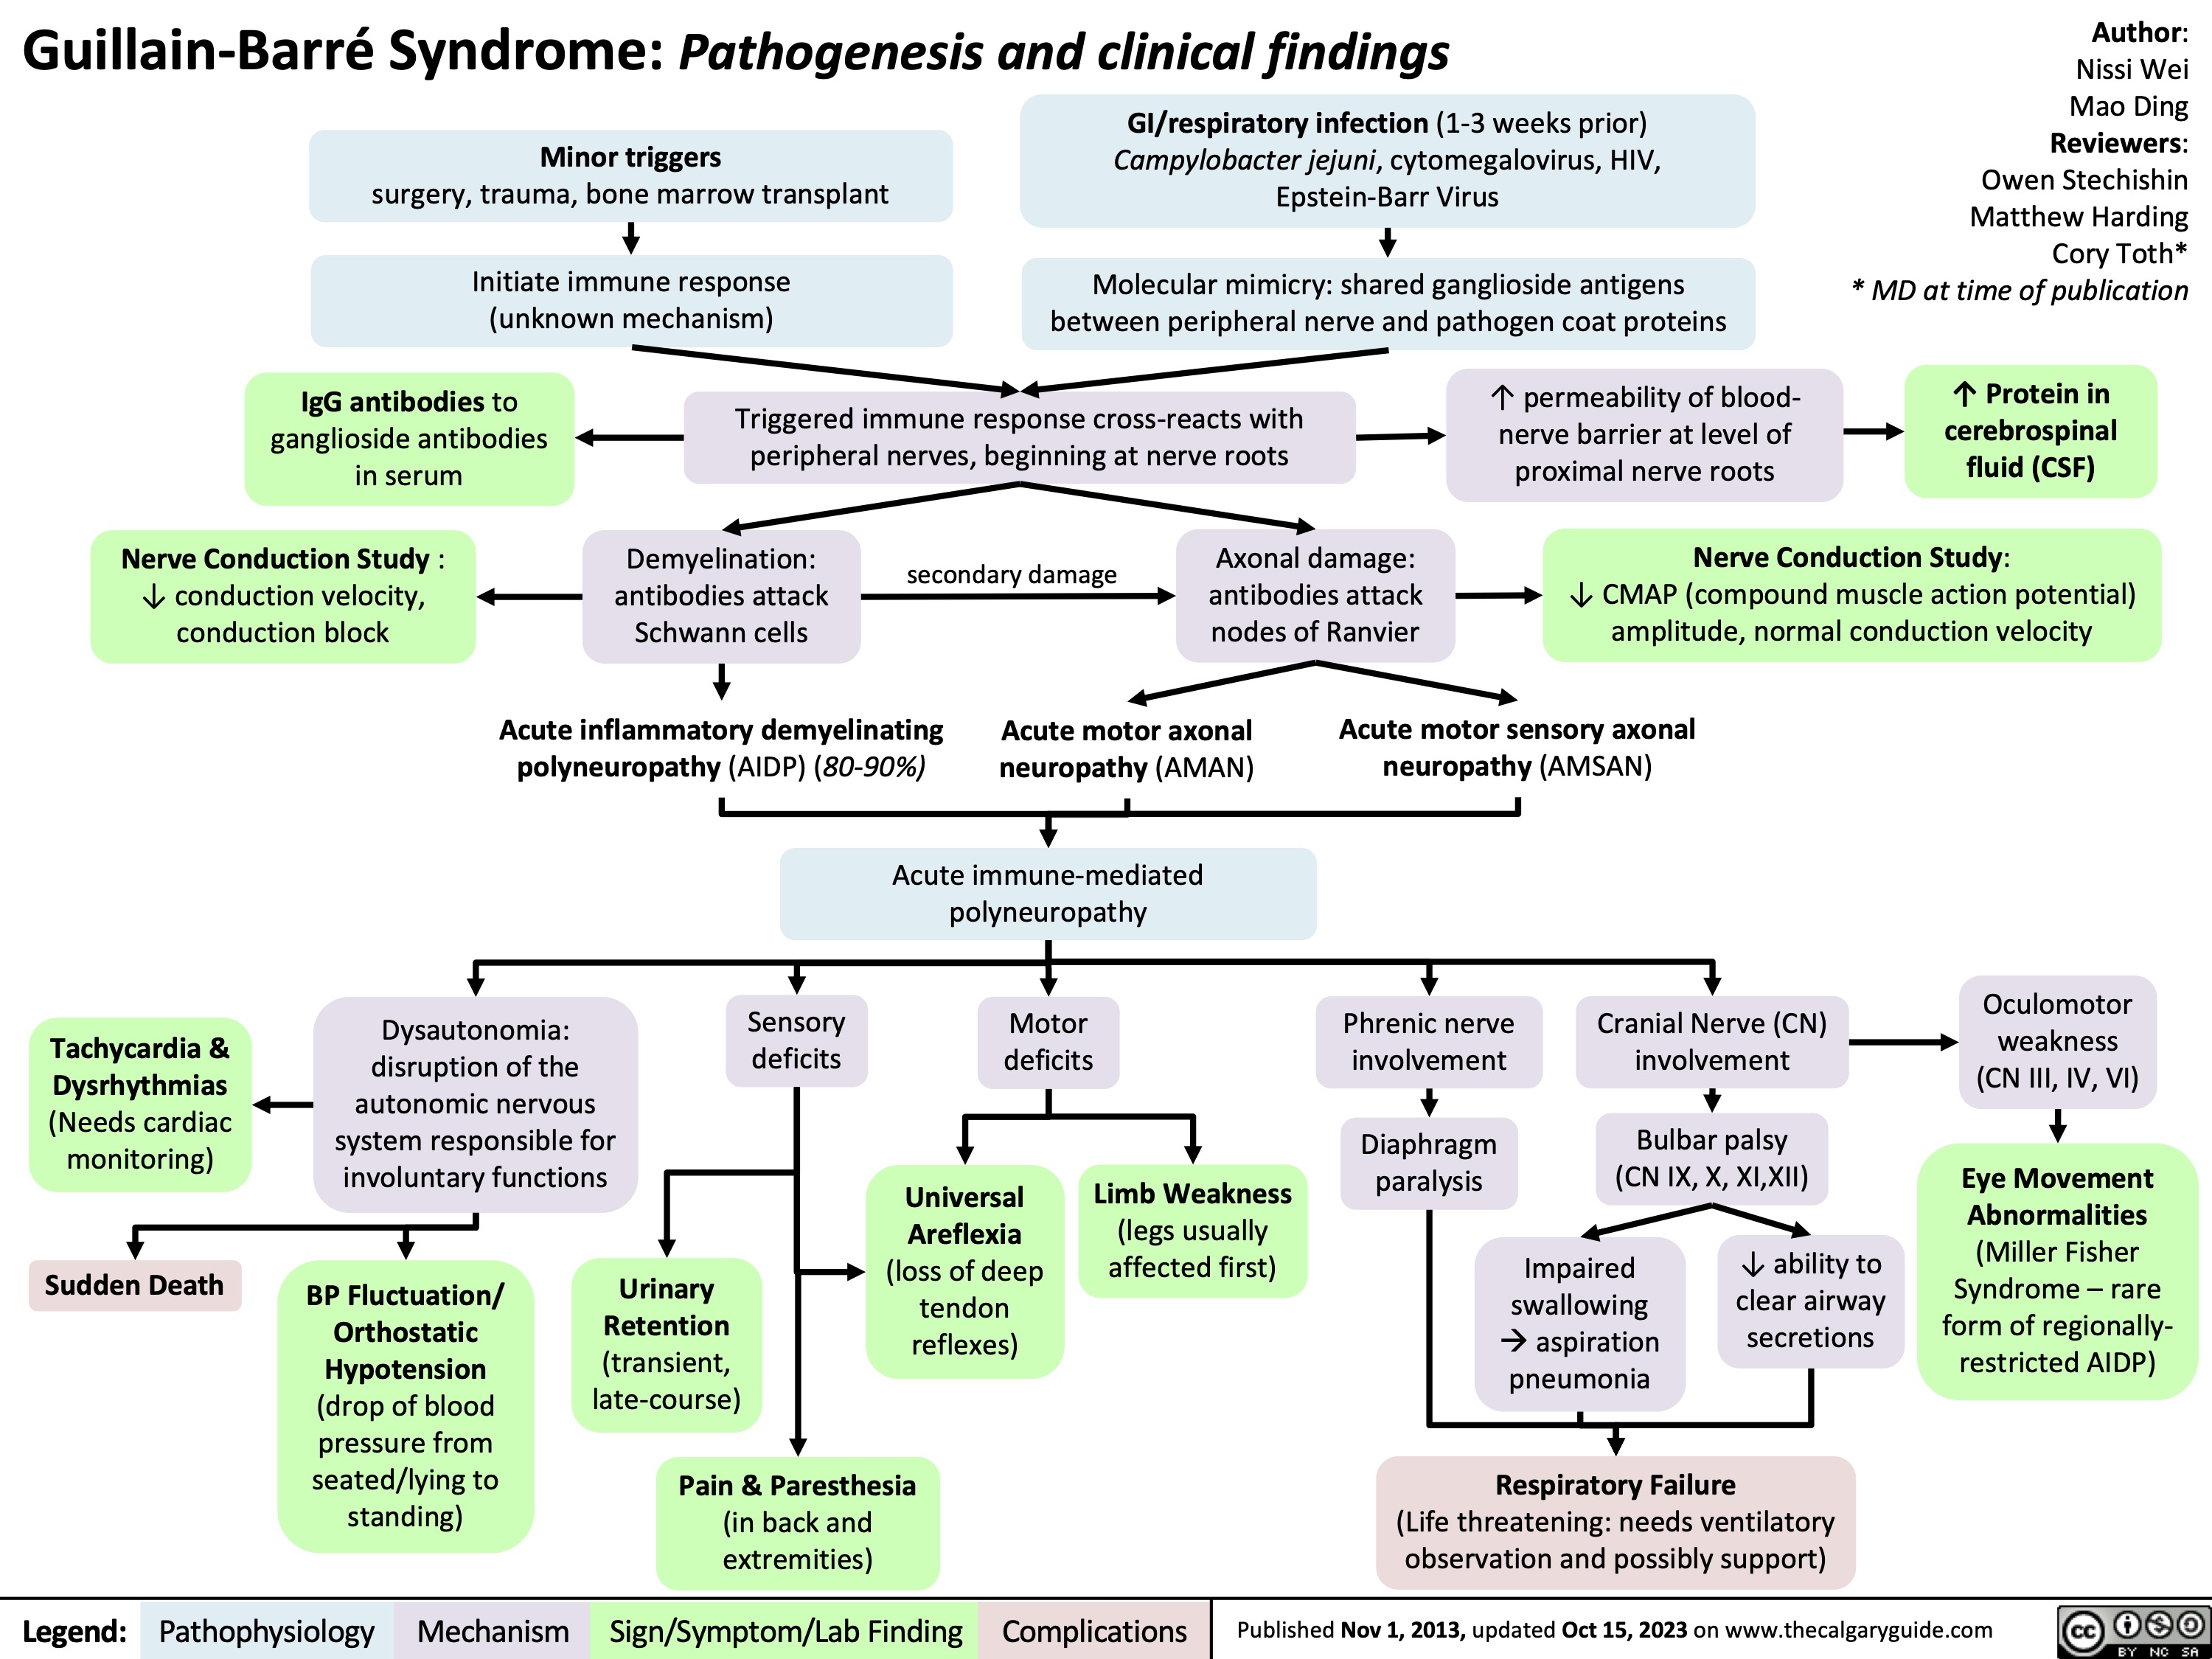 Guillain-Barré Syndrome: Pathogenesis and clinical findings
Author: Nissi Wei Mao Ding Reviewers: Owen Stechishin Matthew Harding Cory Toth* * MD at time of publication
↑ Protein in cerebrospinal fluid (CSF)
  Minor triggers
surgery, trauma, bone marrow transplant
Initiate immune response (unknown mechanism)
GI/respiratory infection (1-3 weeks prior) Campylobacter jejuni, cytomegalovirus, HIV, Epstein-Barr Virus
Molecular mimicry: shared ganglioside antigens between peripheral nerve and pathogen coat proteins
       IgG antibodies to ganglioside antibodies in serum
Nerve Conduction Study : ↓ conduction velocity, conduction block
Triggered immune response cross-reacts with peripheral nerves, beginning at nerve roots
↑ permeability of blood- nerve barrier at level of proximal nerve roots
      Demyelination: antibodies attack Schwann cells
secondary damage
Axonal damage: antibodies attack nodes of Ranvier
Nerve Conduction Study:
↓ CMAP (compound muscle action potential) amplitude, normal conduction velocity
  Acute inflammatory demyelinating polyneuropathy (AIDP) (80-90%)
Acute motor axonal neuropathy (AMAN)
Acute motor sensory axonal neuropathy (AMSAN)
  Acute immune-mediated polyneuropathy
          Tachycardia & Dysrhythmias (Needs cardiac monitoring)
Sudden Death
Dysautonomia: disruption of the autonomic nervous system responsible for involuntary functions
Sensory deficits
Motor deficits
Universal Areflexia (loss of deep tendon reflexes)
Phrenic nerve involvement
Diaphragm paralysis
Cranial Nerve (CN) involvement
Bulbar palsy (CN IX, X, XI,XII)
Oculomotor weakness (CN III, IV, VI)
Eye Movement Abnormalities (Miller Fisher Syndrome – rare form of regionally- restricted AIDP)
               BP Fluctuation/ Orthostatic Hypotension (drop of blood pressure from seated/lying to standing)
Urinary Retention (transient, late-course)
Limb Weakness
(legs usually affected first)
Impaired swallowing àaspiration pneumonia
↓ ability to clear airway secretions
  Pain & Paresthesia
(in back and extremities)
Respiratory Failure
(Life threatening: needs ventilatory observation and possibly support)
 Legend:
 Pathophysiology
Mechanism
Sign/Symptom/Lab Finding
 Complications
 Published Nov 1, 2013, updated Oct 15, 2023 on www.thecalgaryguide.com
   
Guillain-Barré Syndrome
Minor triggers (surgery, trauma,
GI/respiratory infection
Campylobacter jejuni, CMV, HIV , EBV
(1-3 weeks prior)
Molecular mimicry: shared ganglioside antigens between peripheral nerve and pathogen coat proteins
Author: Nissi Wei Reviewers: Owen Stechishin Matthew Harding Cory Toth* * MD at time of publication
↑ Protein in CSF
  bone marrow transplant)
Initiate immune response (unknown mechanism)
       IgG antibodies to ganglioside antibodies in serum
NCS: ↓ conduction velocity, conduction block
Triggered immune response cross-reacts with peripheral nerves, beginning at nerve roots
↑ permeability of blood- nerve barrier at level of proximal nerve roots
NCS: ↓ CMAP amplitude, normal conduction velocity
         Demyelination: antibodies attack Schwann cells
secondary damage
Axonal damage:
antibodies attack nodes of Ranvier
     Acute inflammatory demyelinating polyneuropathy (AIDP) (80-90%)
Acute motor axonal neuropathy (AMAN)
Cranial nerve involvement
Dysautonomia
Acute motor sensory axonal neuropathy (AMSAN)
Eye Movement Abnormalities
(Miller Fisher Syndrome – rare form of regionally-restricted AIDP)
          Acute immune-mediated polyneuropathy
Oculomotor weakness (CN III, IV, VI)
Bulbar palsy (CN IX, X, XI,XII)
Phrenic nerve involvement
↓ ability to clear airway secretions
Impaired swallowingà aspiration pneumonia
Diaphragm paralysis
Respiratory Failure
(Life threatening: needs ventilatory observation and possibly support)
          Motor deficits
Sensory deficits
Pain & Paresthesias in back and extremities
               Limb Weakness
(legs usually affected first)
Universal Areflexia
Urinary Retention
(transient, late-course)
Sudden Death
BP Fluctuation, Orthostatic Hypotension
Tachycardia, Dysrhythmias (Needs cardiac monitoring)
Abbreviations:
• NCS - nerve conduction
study
• CMAP - compound muscle
action potential
• EBV - Epstein-Barr Virus
• CMV - cytomegalovirus
• CN - cranial nerve
    Note: Aα, Aβ peripheral nerve fibres (large, fast-conducting, heavily myelinated axons for muscle stretch, light touch & proprioception) are more affected than Aδ and C fibres (small, less myelinated, slowly-conducting fibres for pain and temperature)
   Legend:
 Pathophysiology
 Mechanism
 Sign/Symptom/Lab Finding
 Complications
 Published November 1, 2013 on www.thecalgaryguide.com
 